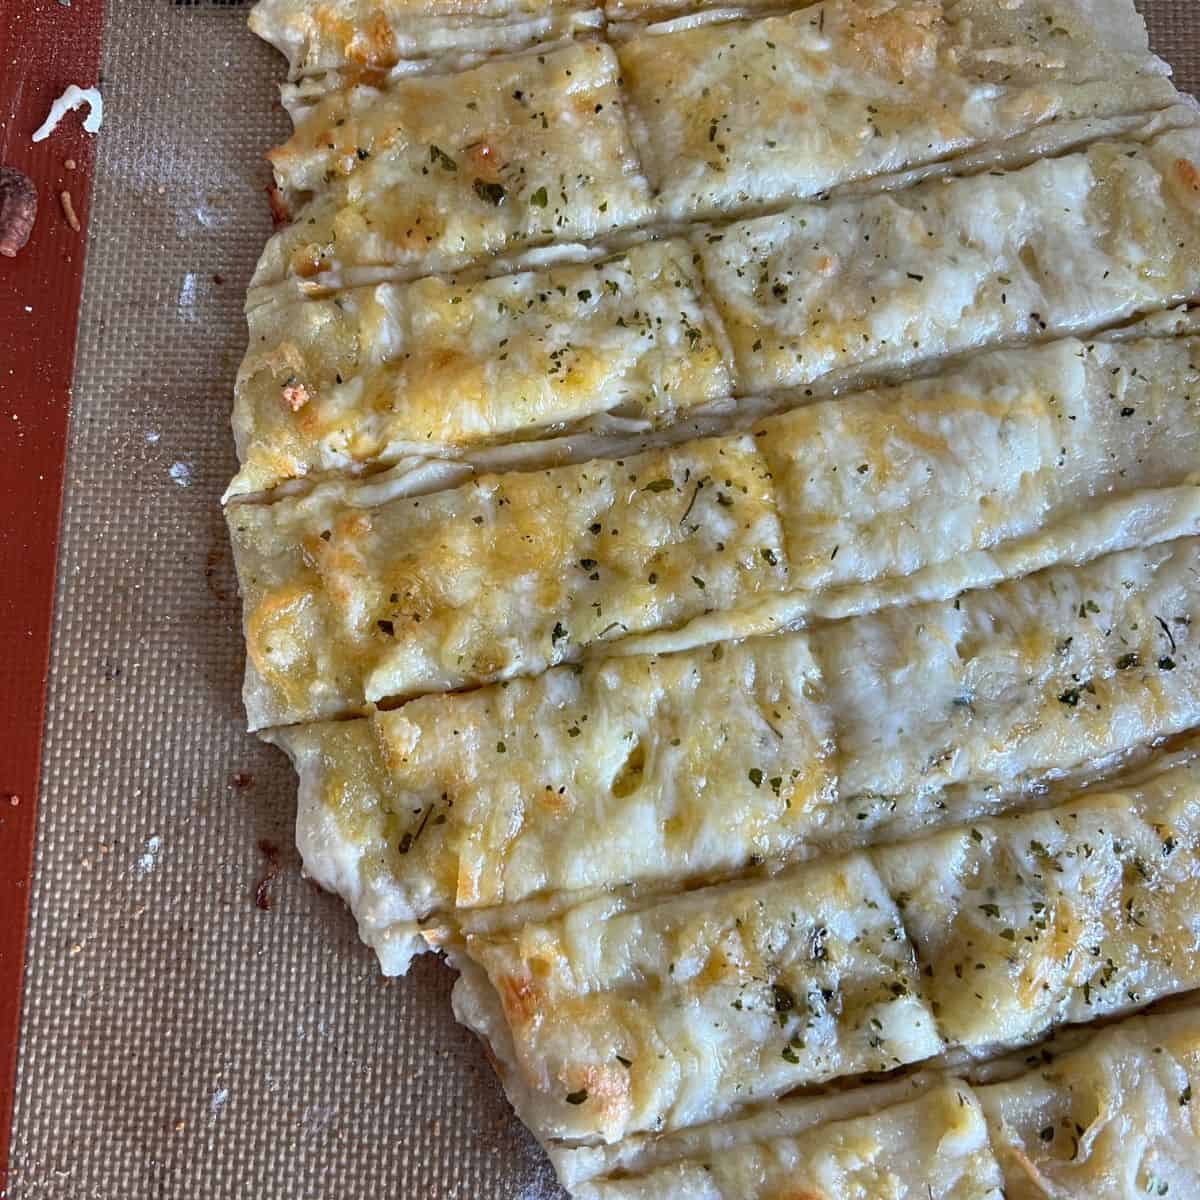 These Easy Cheesy Garlic Breadsticks are made with the famous 2 ingredient dough! Some call it 2 Ingredient Dough or Protein Dough cause it's made with equal parts Greek Yogurt and Self Rising Flour. 